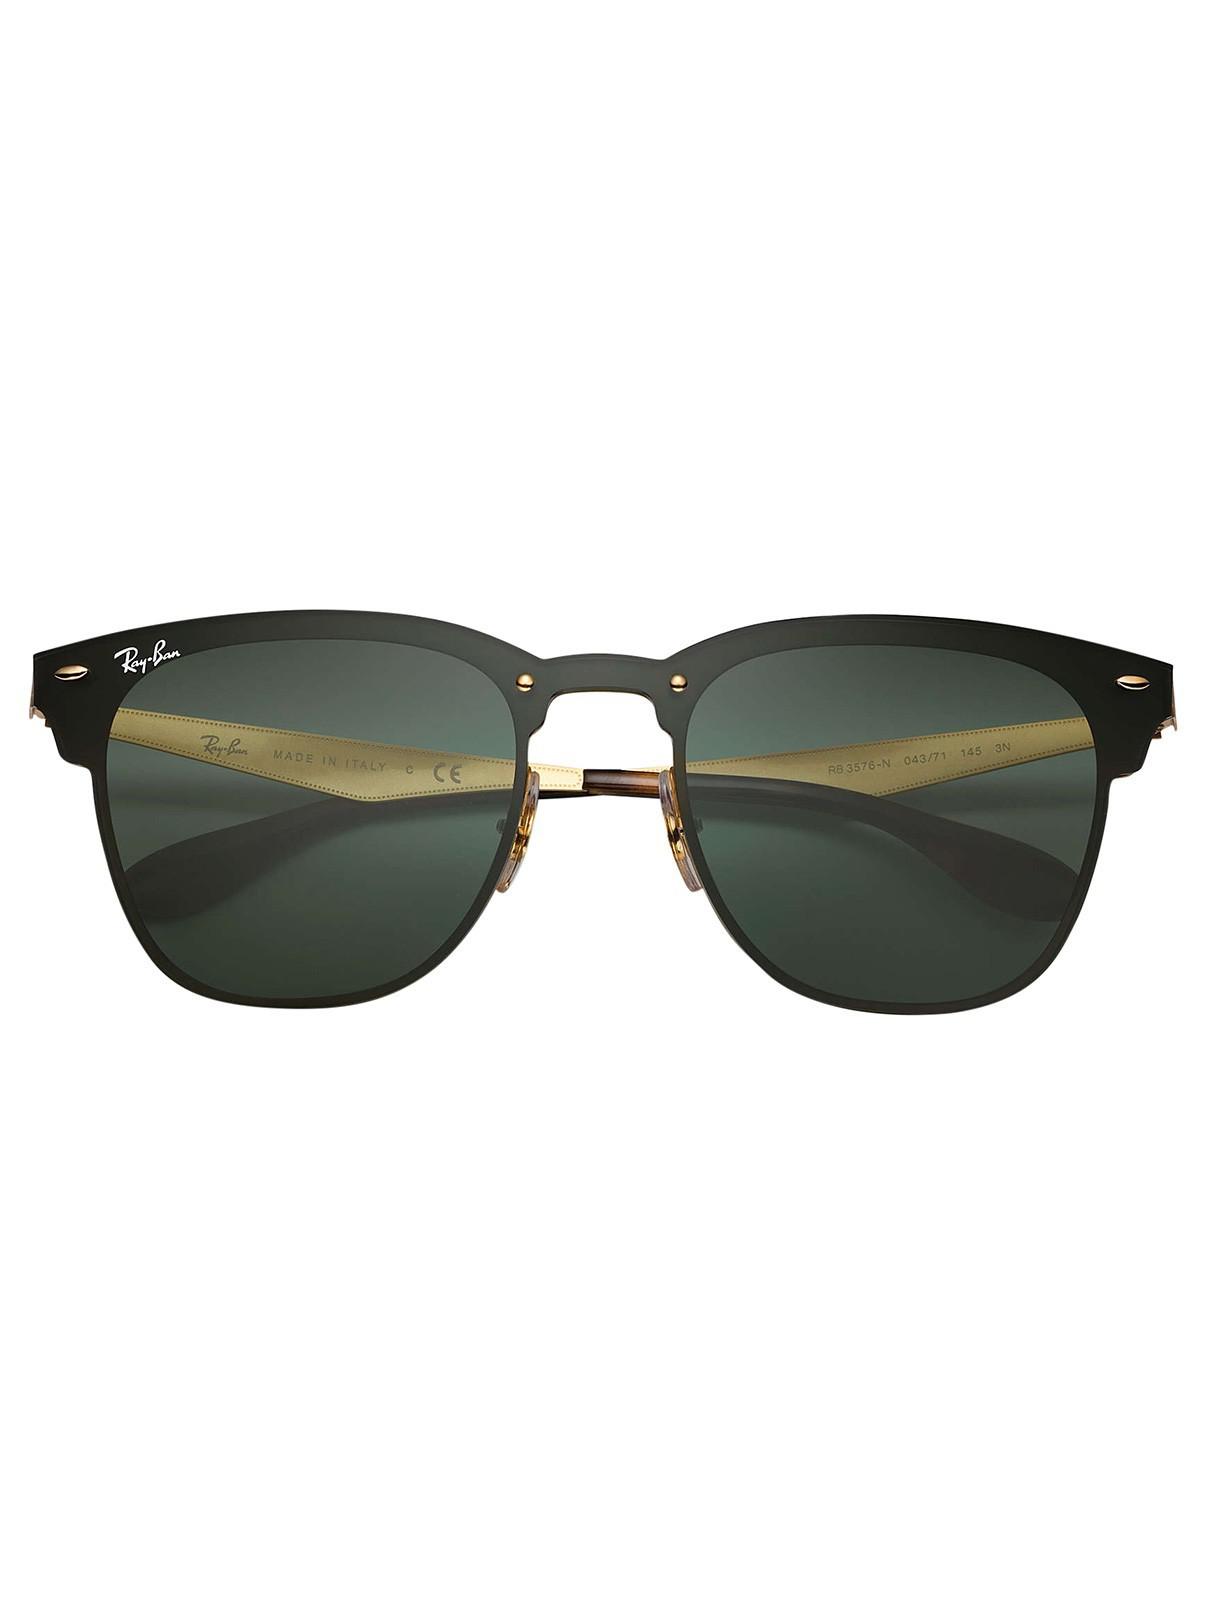 Ray-Ban Black/gold Blaze Clubmaster Steel Sunglasses for Men - Lyst